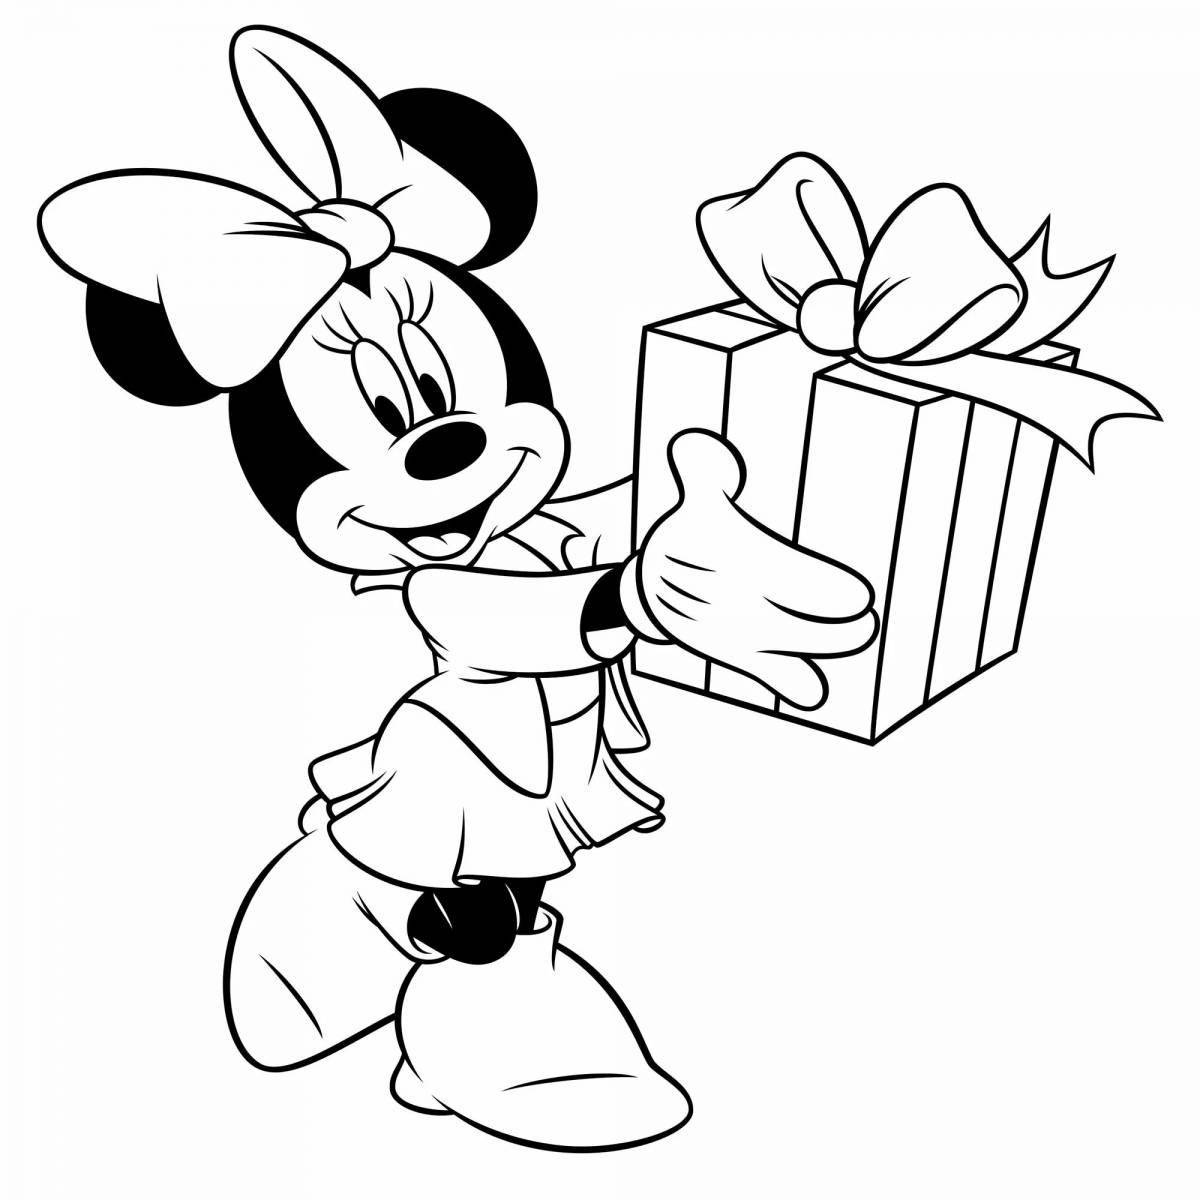 Charming minnie mouse coloring book